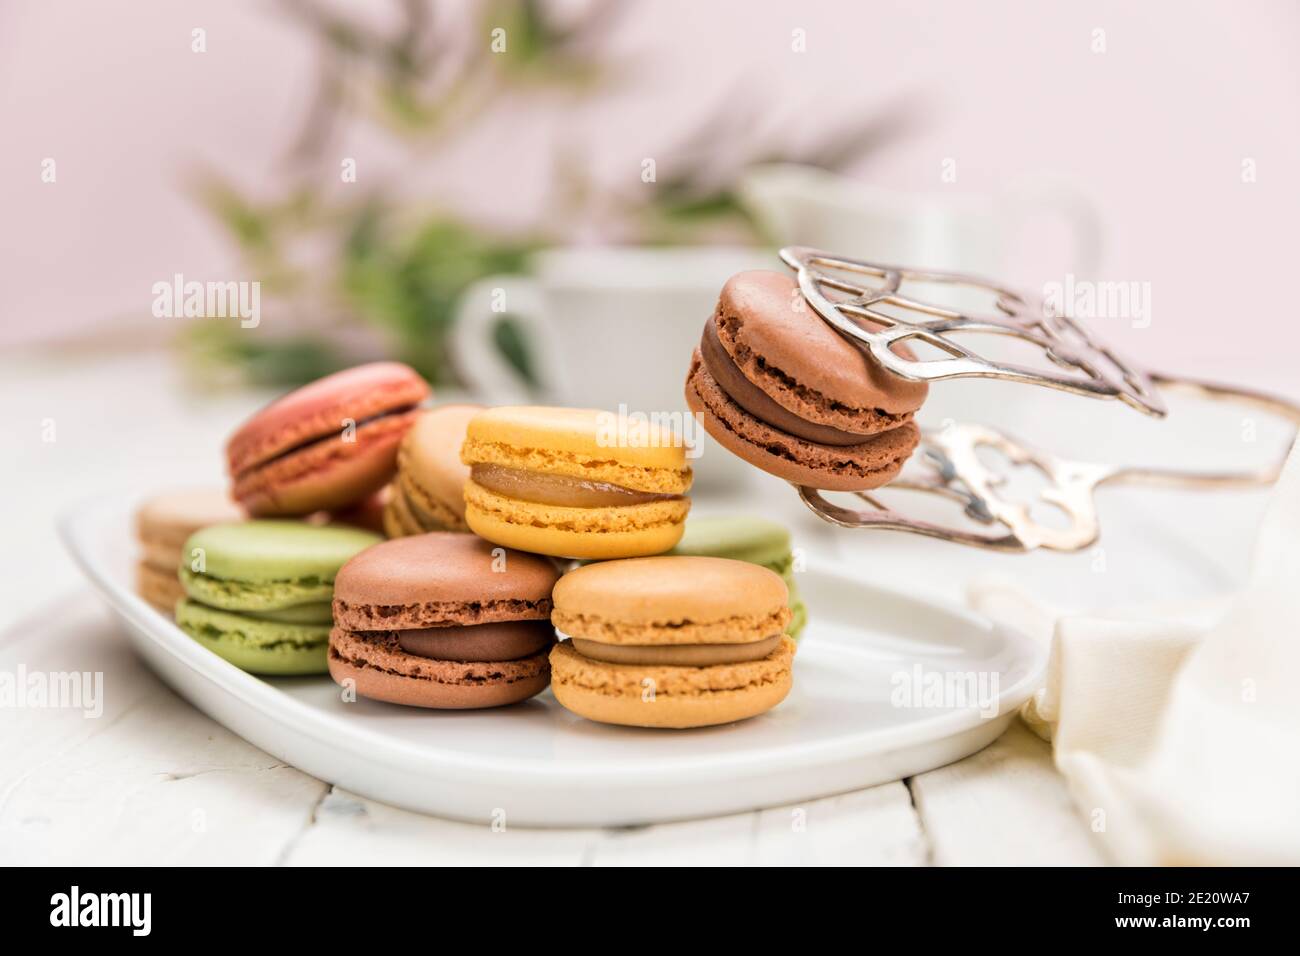 Assortment of French macarons pastry on coffee table, focus on a chocolate flavored one held up with pastry tongs, Stock Photo